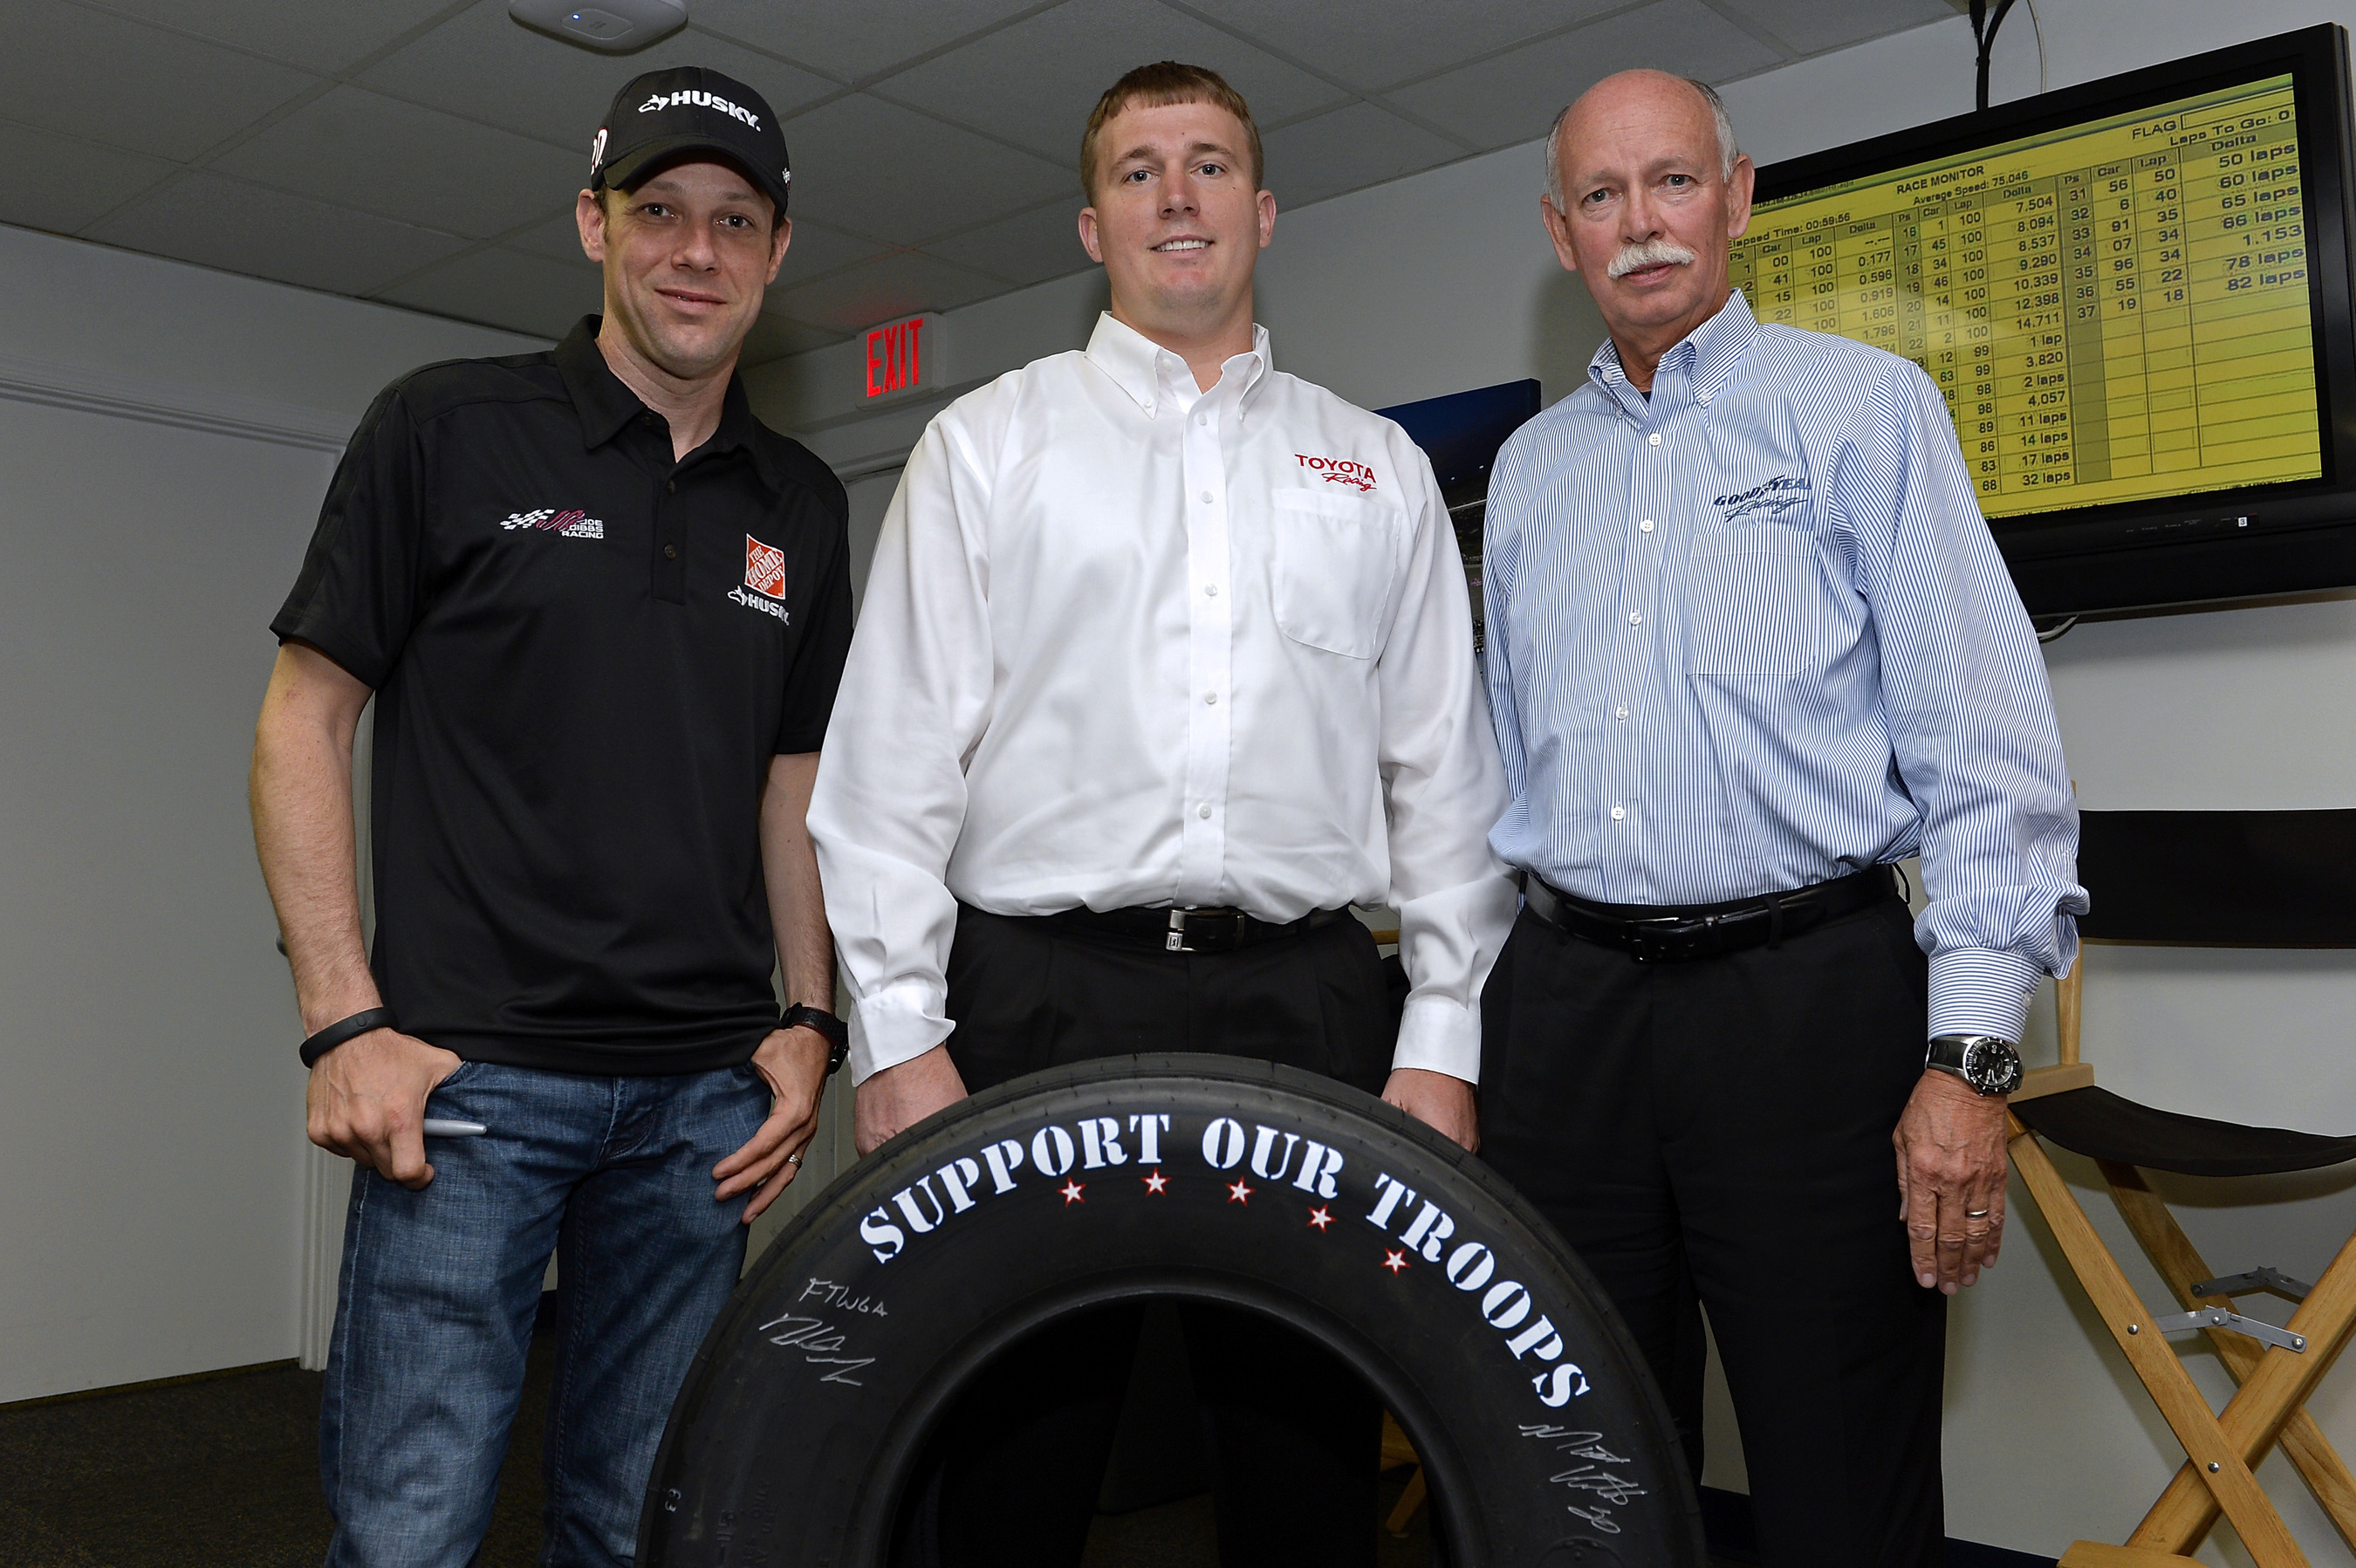 (Left to right) NASCAR driver Matt Kenseth, Medal of Honor recipient Sgt. Dakota Meyer and Stu Grant, Goodyear general manager of global race tires, unveil Goodyear’s 2014 “Support Our Troops” race tire which will be used during all NASCAR races leading up to Memorial Day at Charlotte Motor Speedway.  The custom tires will coincide with the launch of Goodyear’s fifth annual "Goodyear Gives Back" campaign-a charitable program benefiting the Support Our Troops Organization, a nonprofit nationwide organization that works to bolster the morale and well-being of America’s troops and their families. (PRNewsFoto/The Goodyear Tire & Rubber Co.)